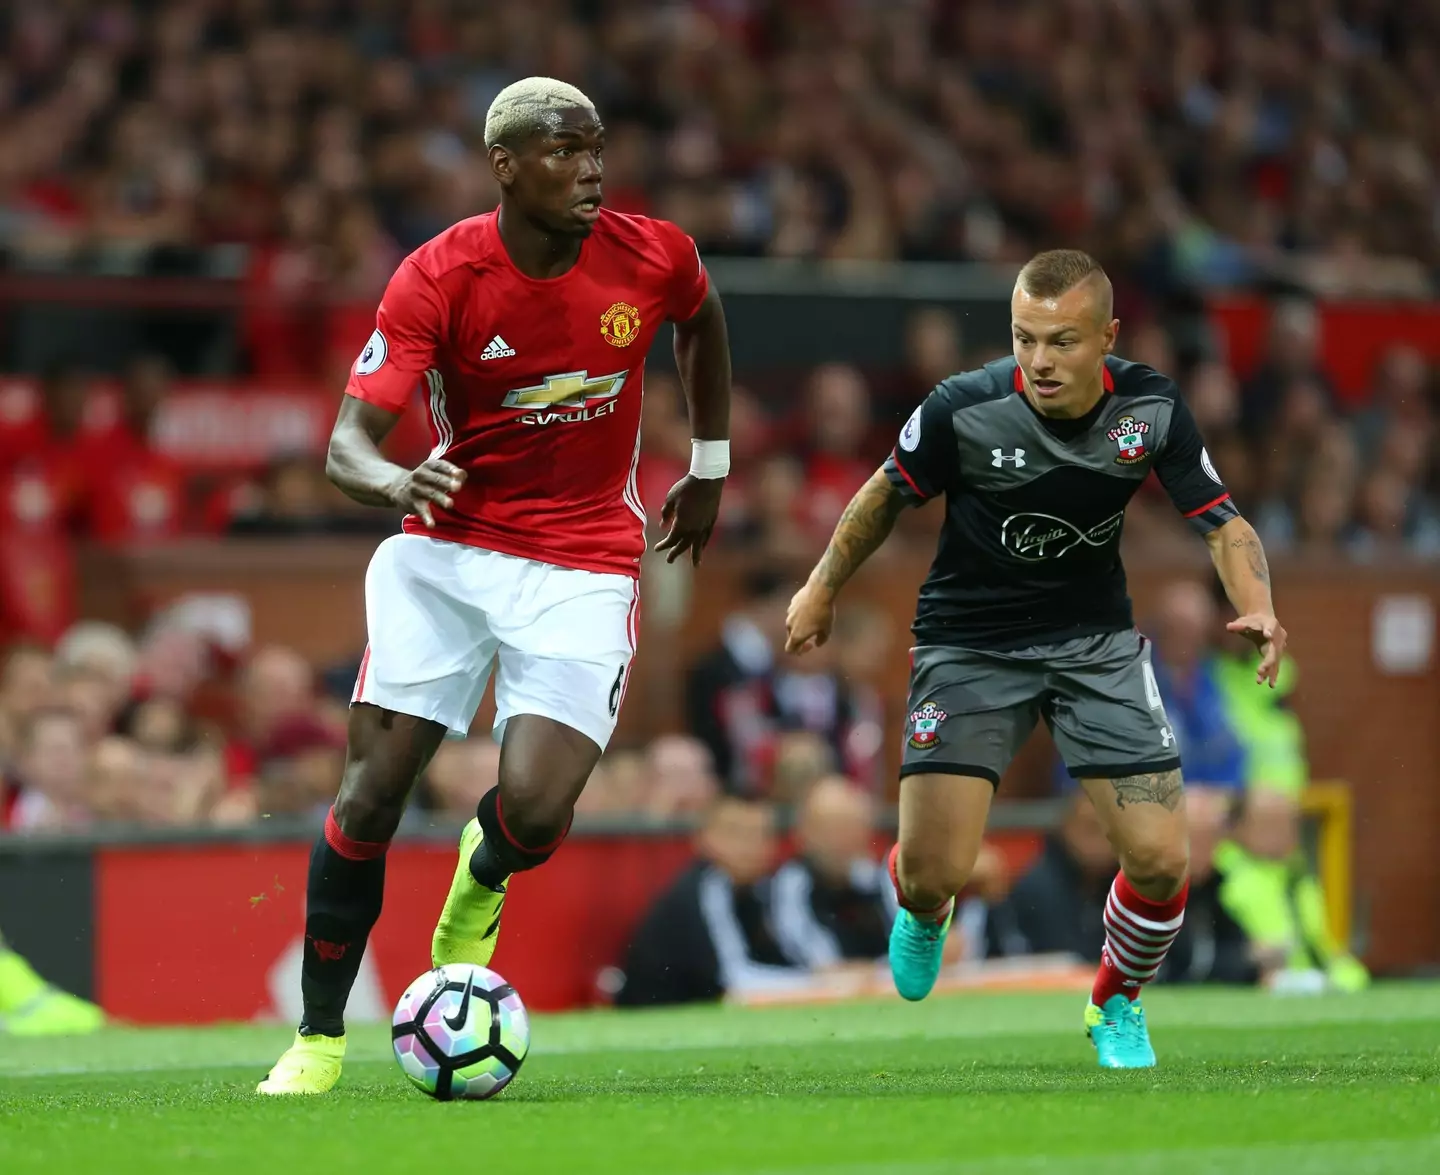 Paul Pogba playing in his second debut for Manchester United against Southampton at Old Trafford |